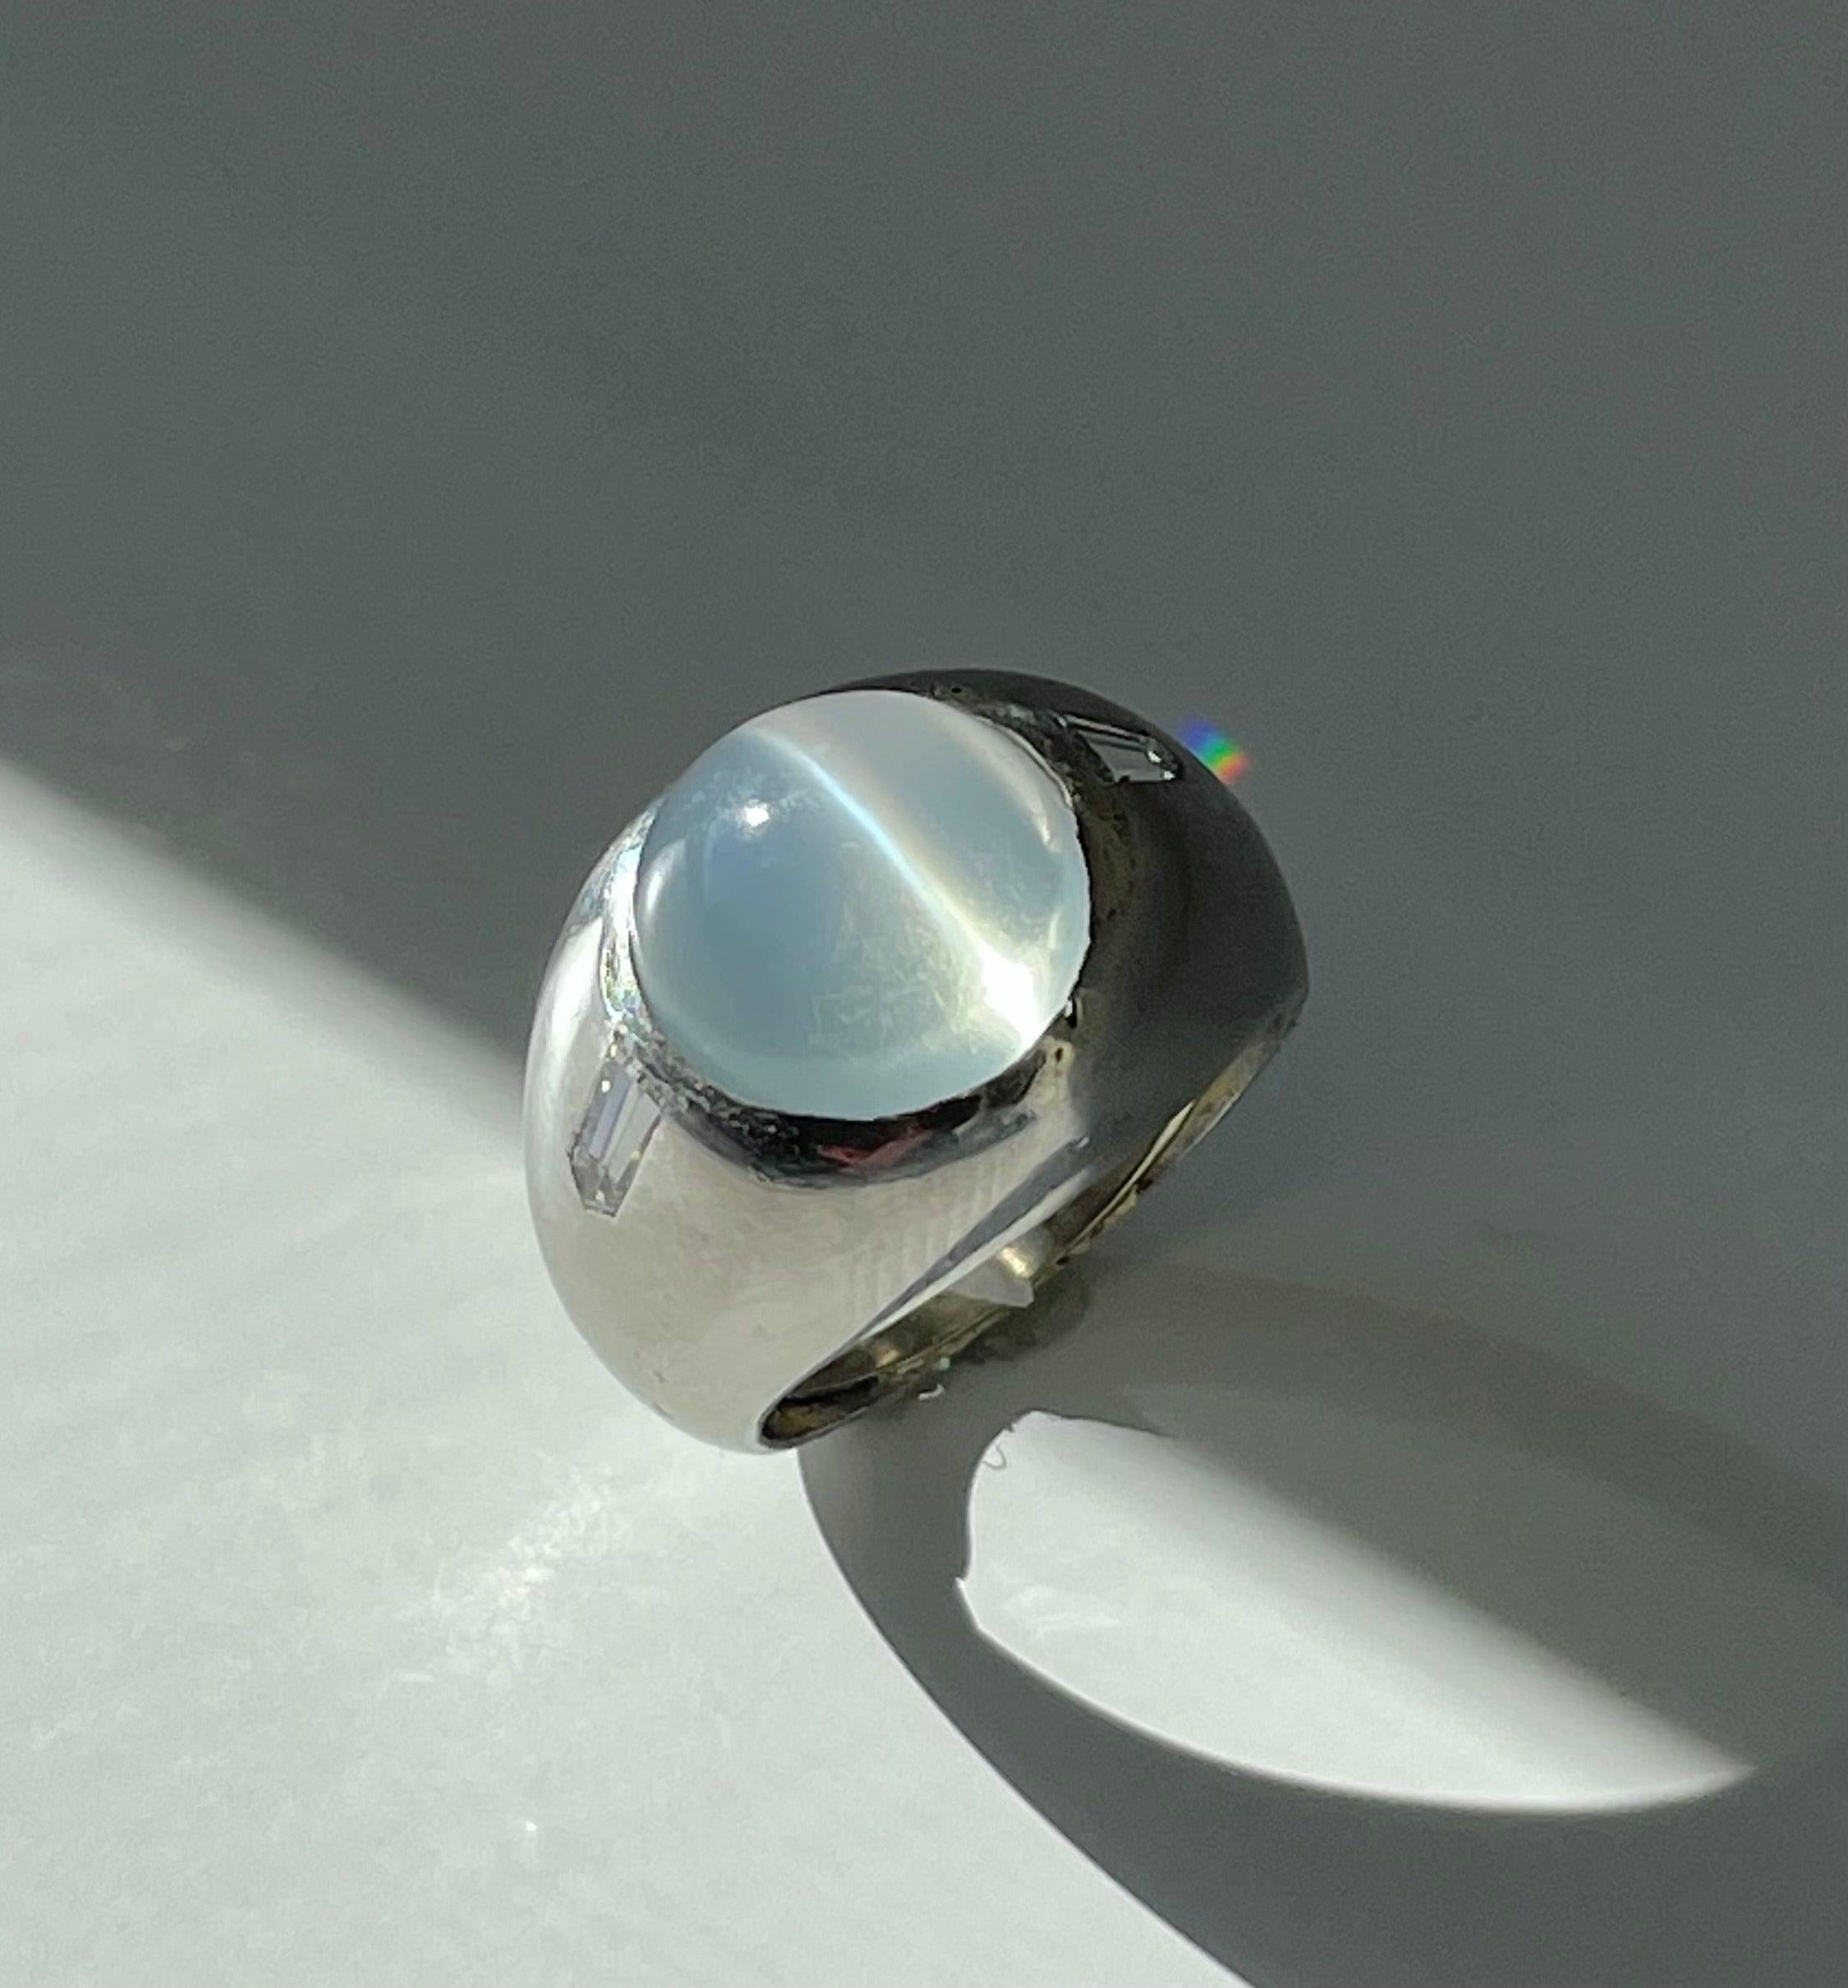 Weight: 24.7

Size: 7.25

Diamonds: two .16 carat bullet shaped diamonds, VS 2 clarity H-I range in color

Metal: 18k white gold

Cat's Eye Moonstone: 12mm

Measurements: 15.5mm north to south

Notes: a piece of white gold has been laid inside the